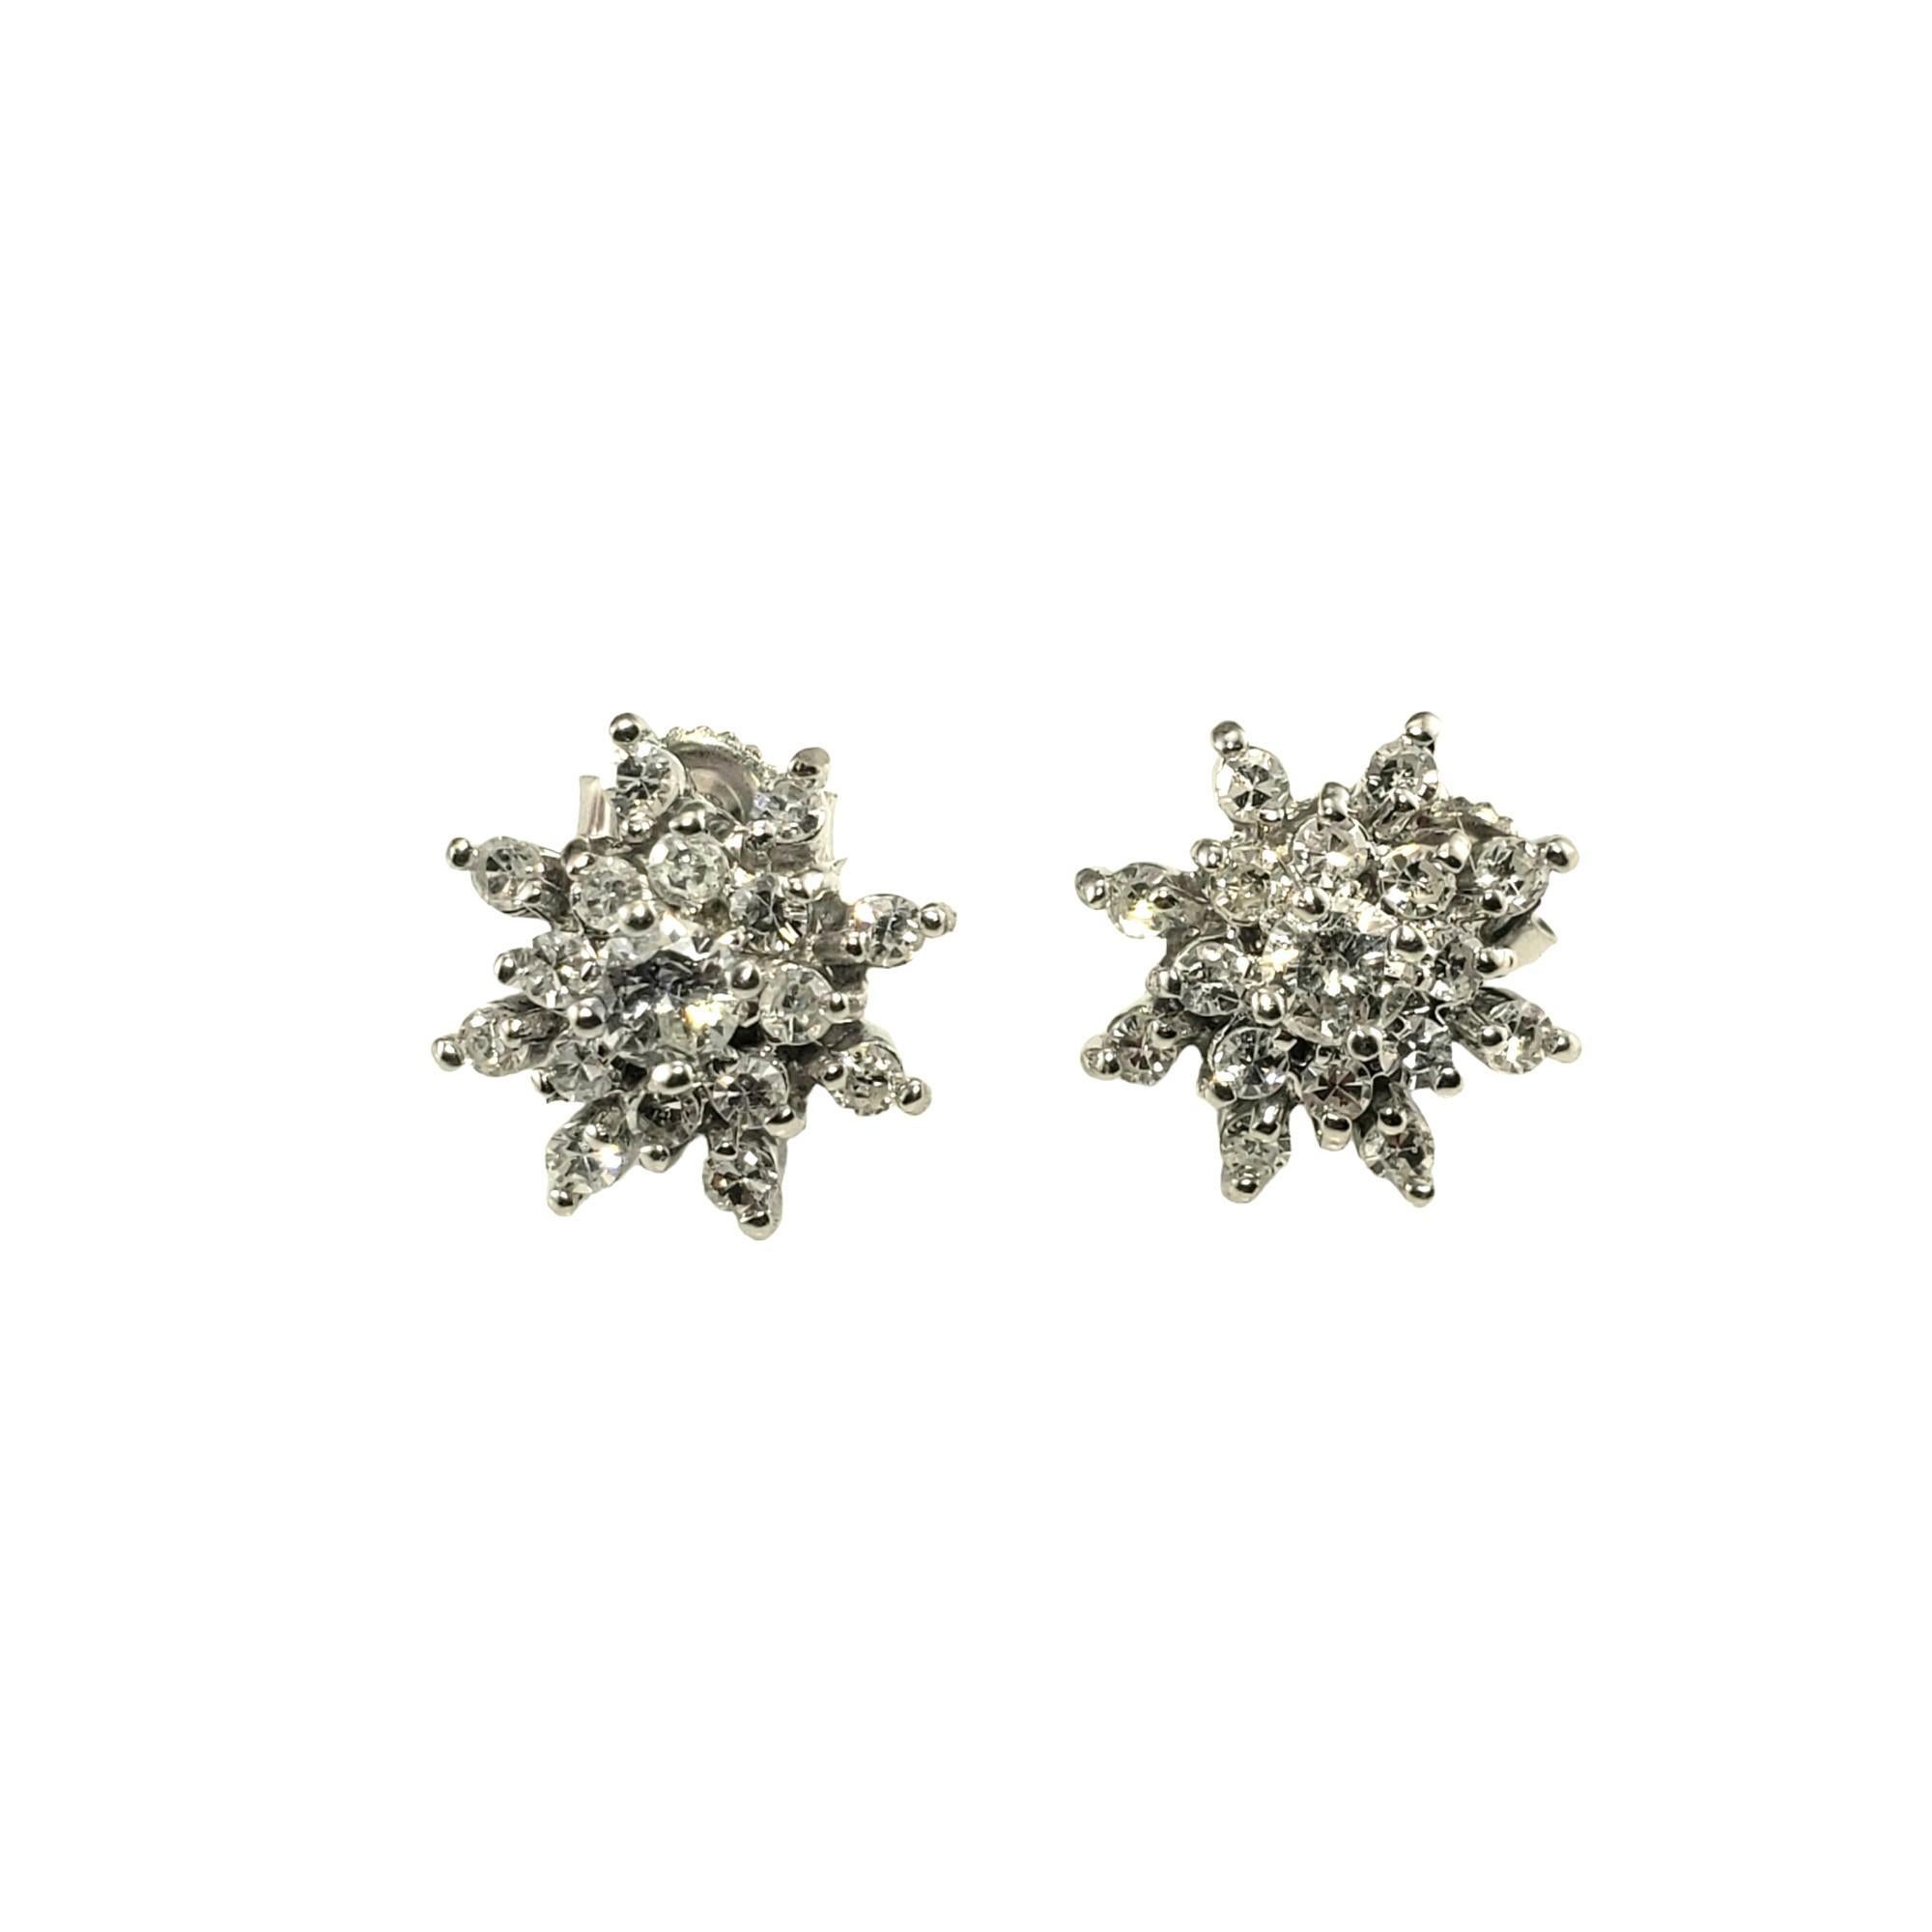 Vintage 10K White Gold Diamond Cluster Earrings-

These sparkling earrings each feature 16 round single cut diamonds and one round brilliant cut diamond set in classic 10K white gold.  Push back closures.

Approximate total diamond weight: .58